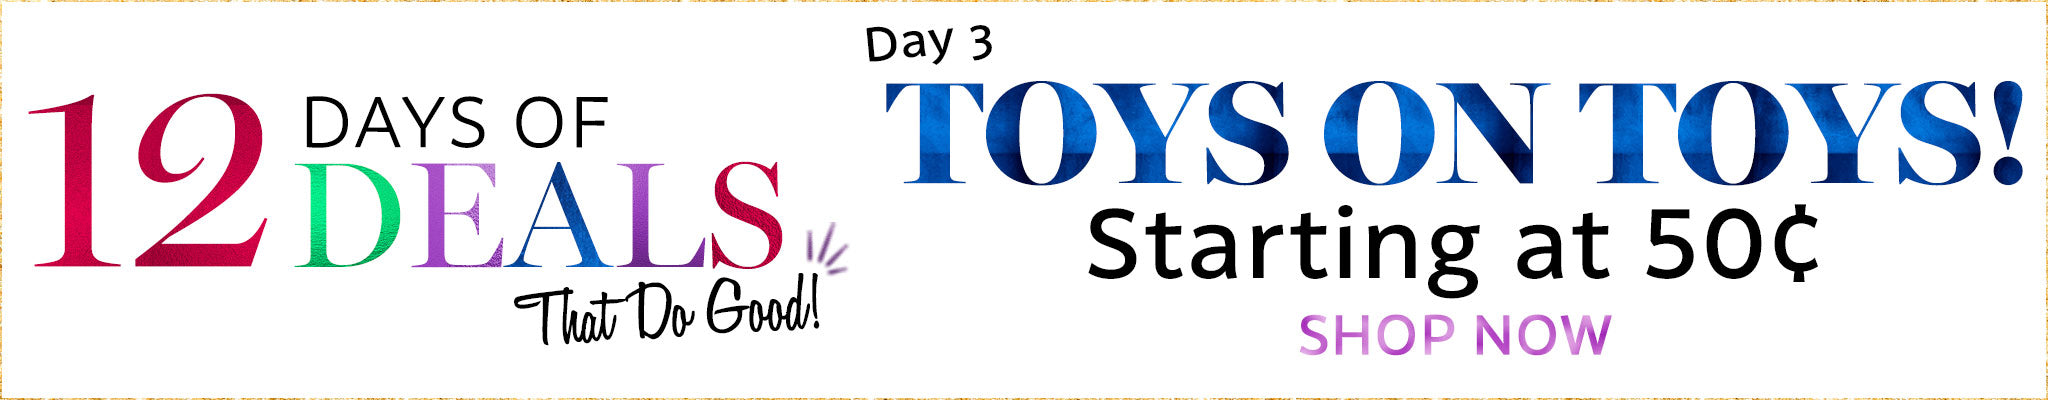 12 Days of Deals | Day 3 | Toys on Toys! Starting at $.50